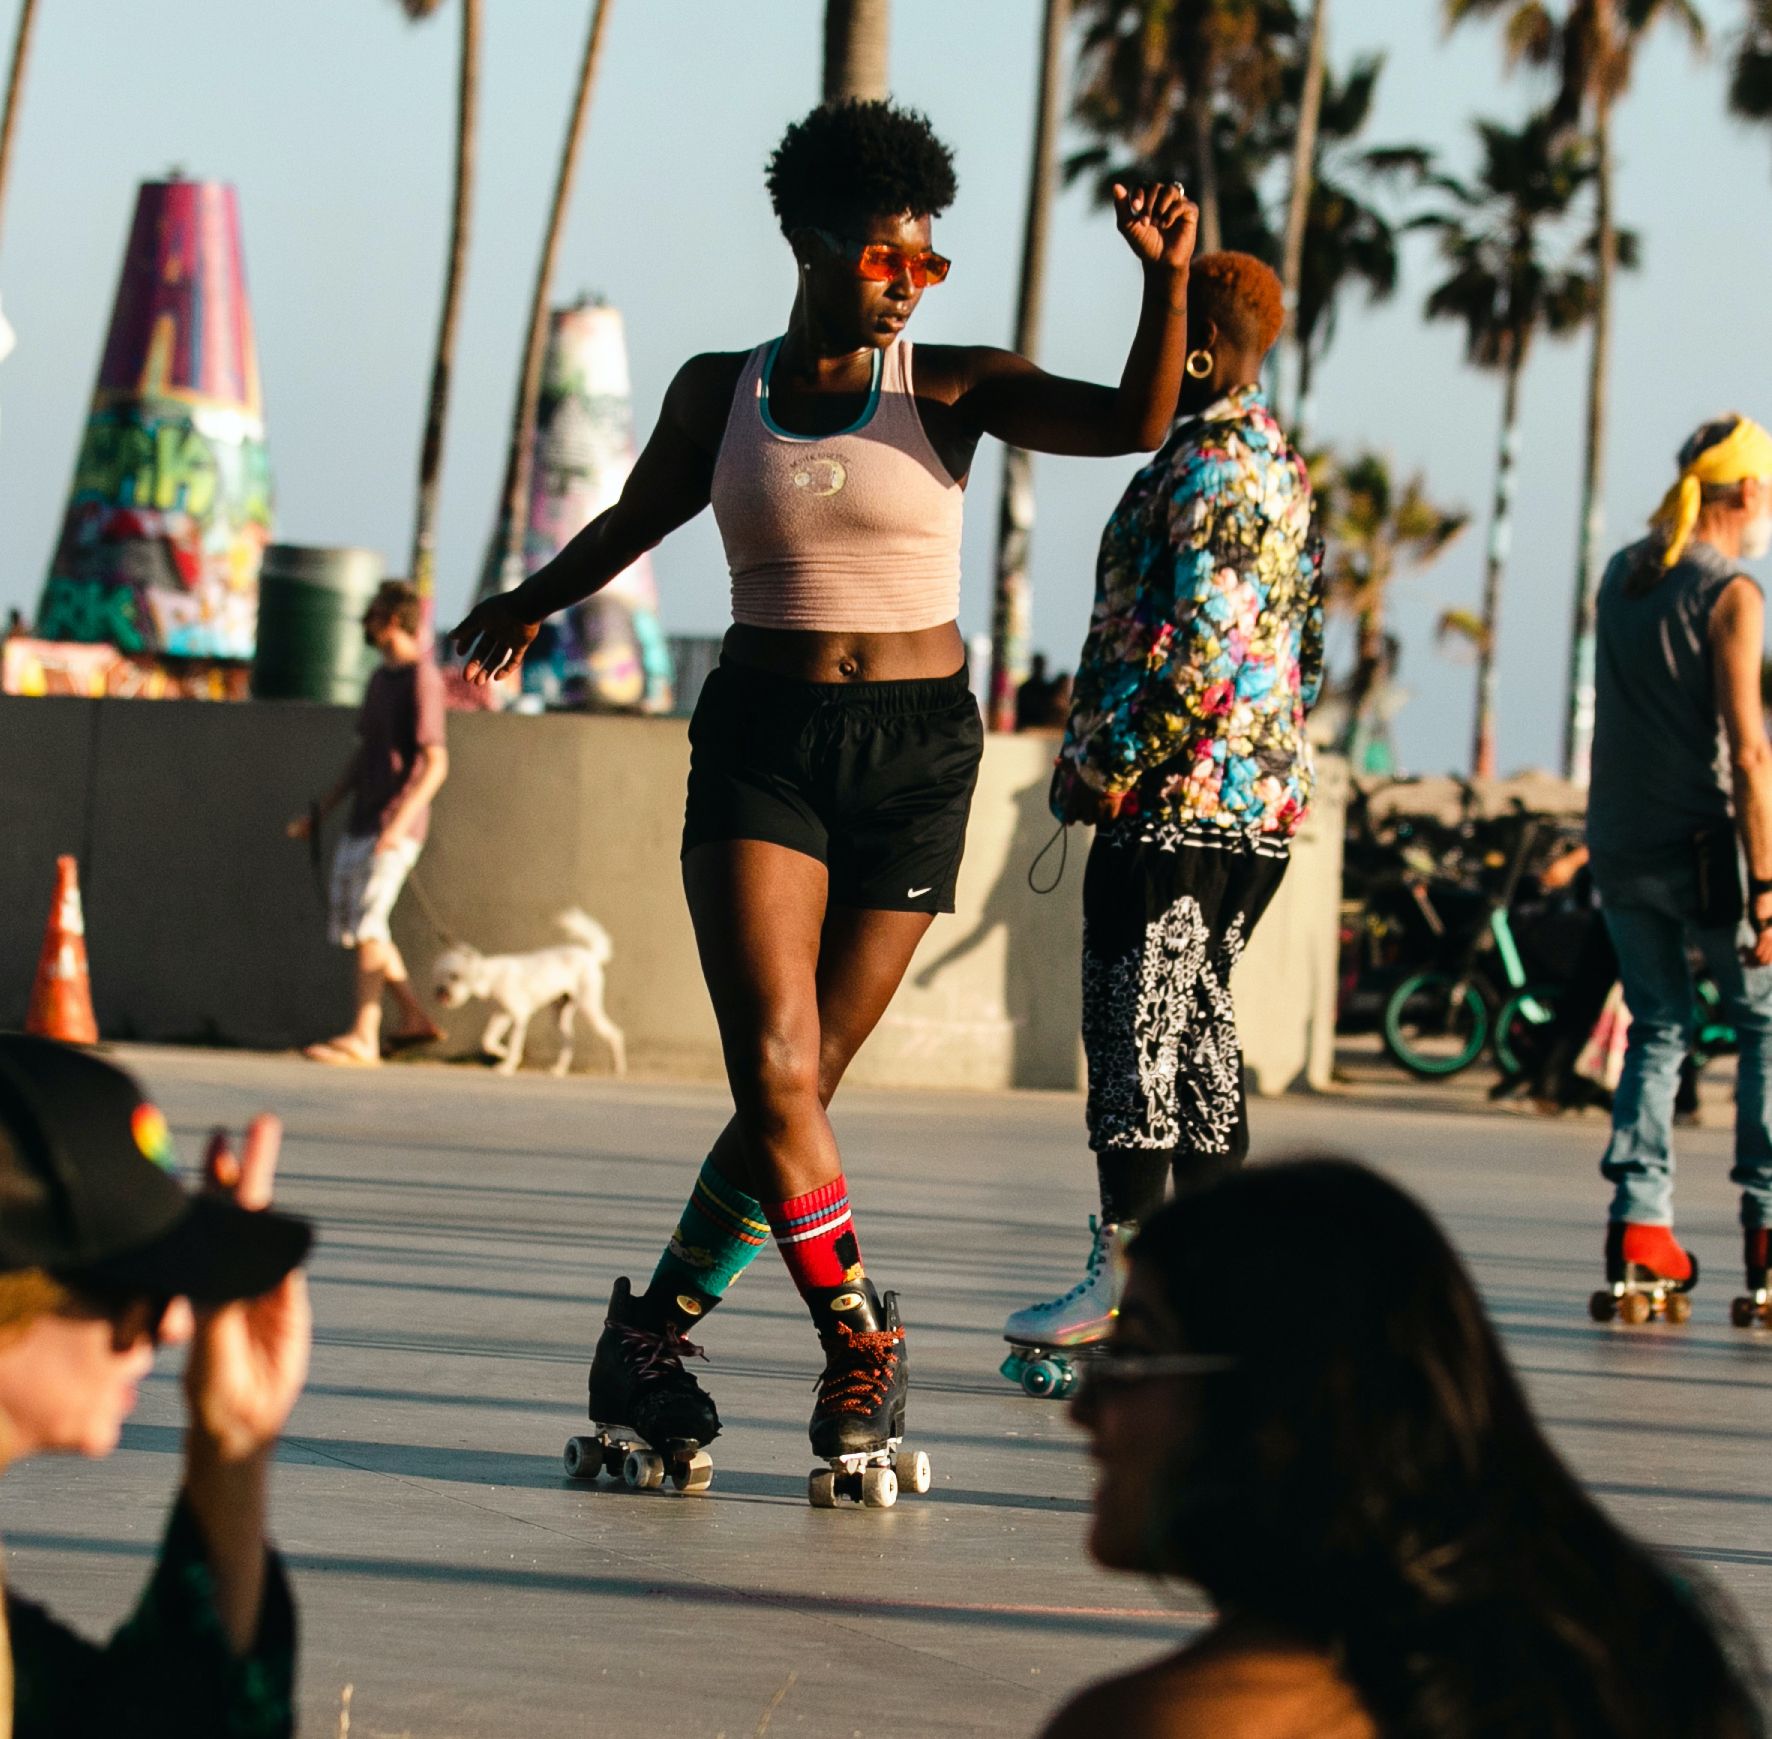 How Roller Skating Found Its Groove Again